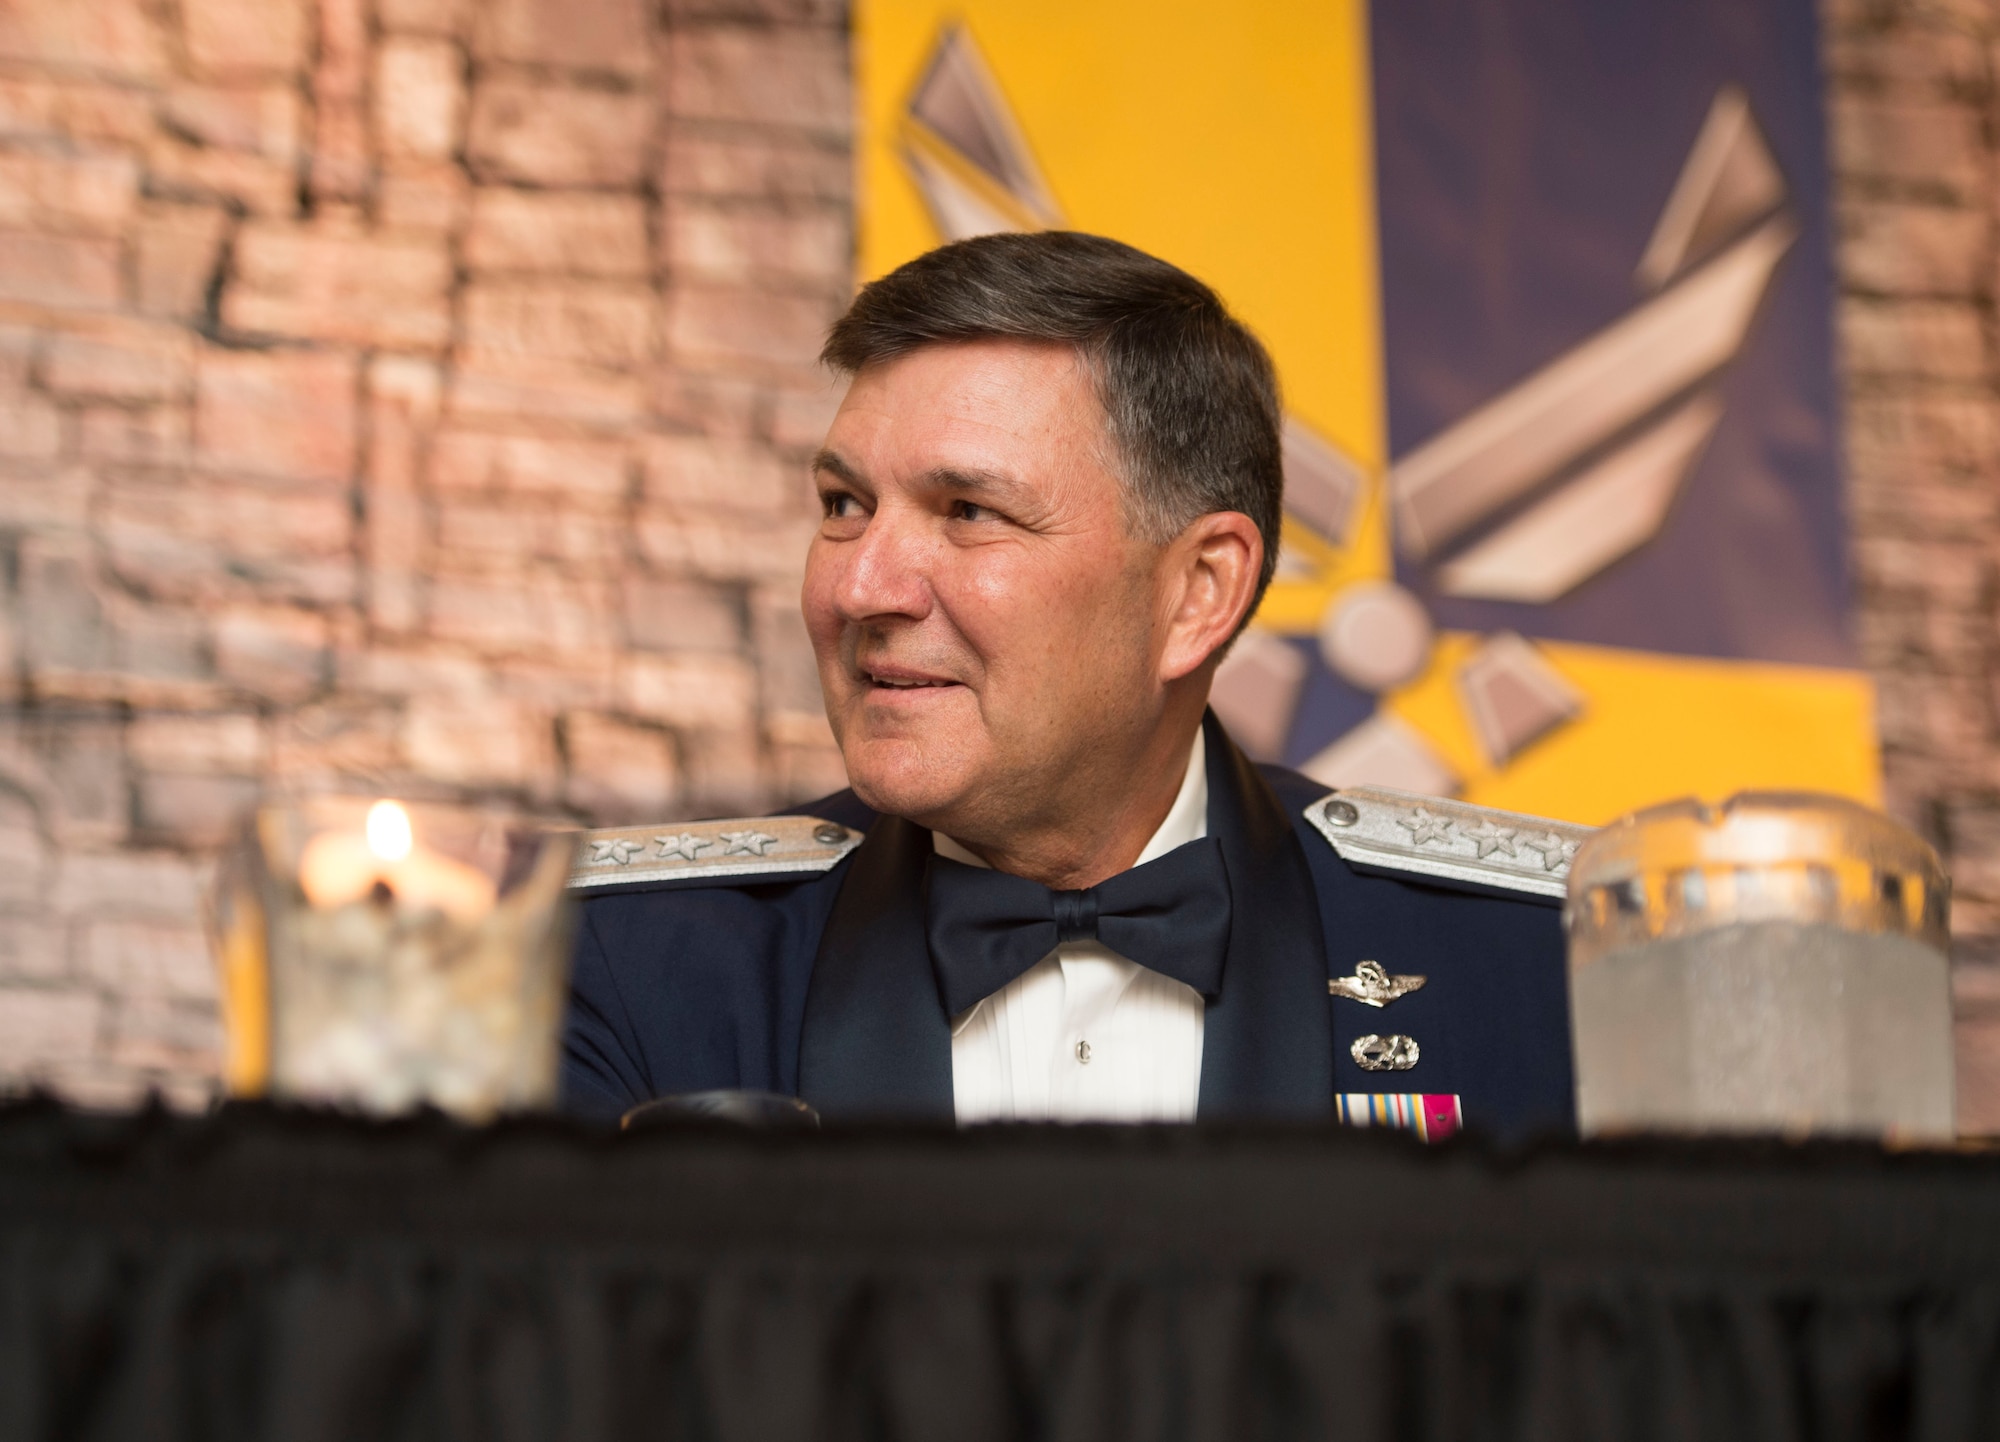 Lt. Gen. Brad Heithold, the former commander of the Air Force Special Operations Command, smiles while watching a video dedication to him during the Order of the Sword ceremony at Hurlburt Field, Fla., Nov. 18, 2016. Heithold is the tenth officer inducted into Air Force Special Operations Command’s Order of the Sword what?. (U.S. Air Force photo by Senior Airman Krystal M. Garrett)